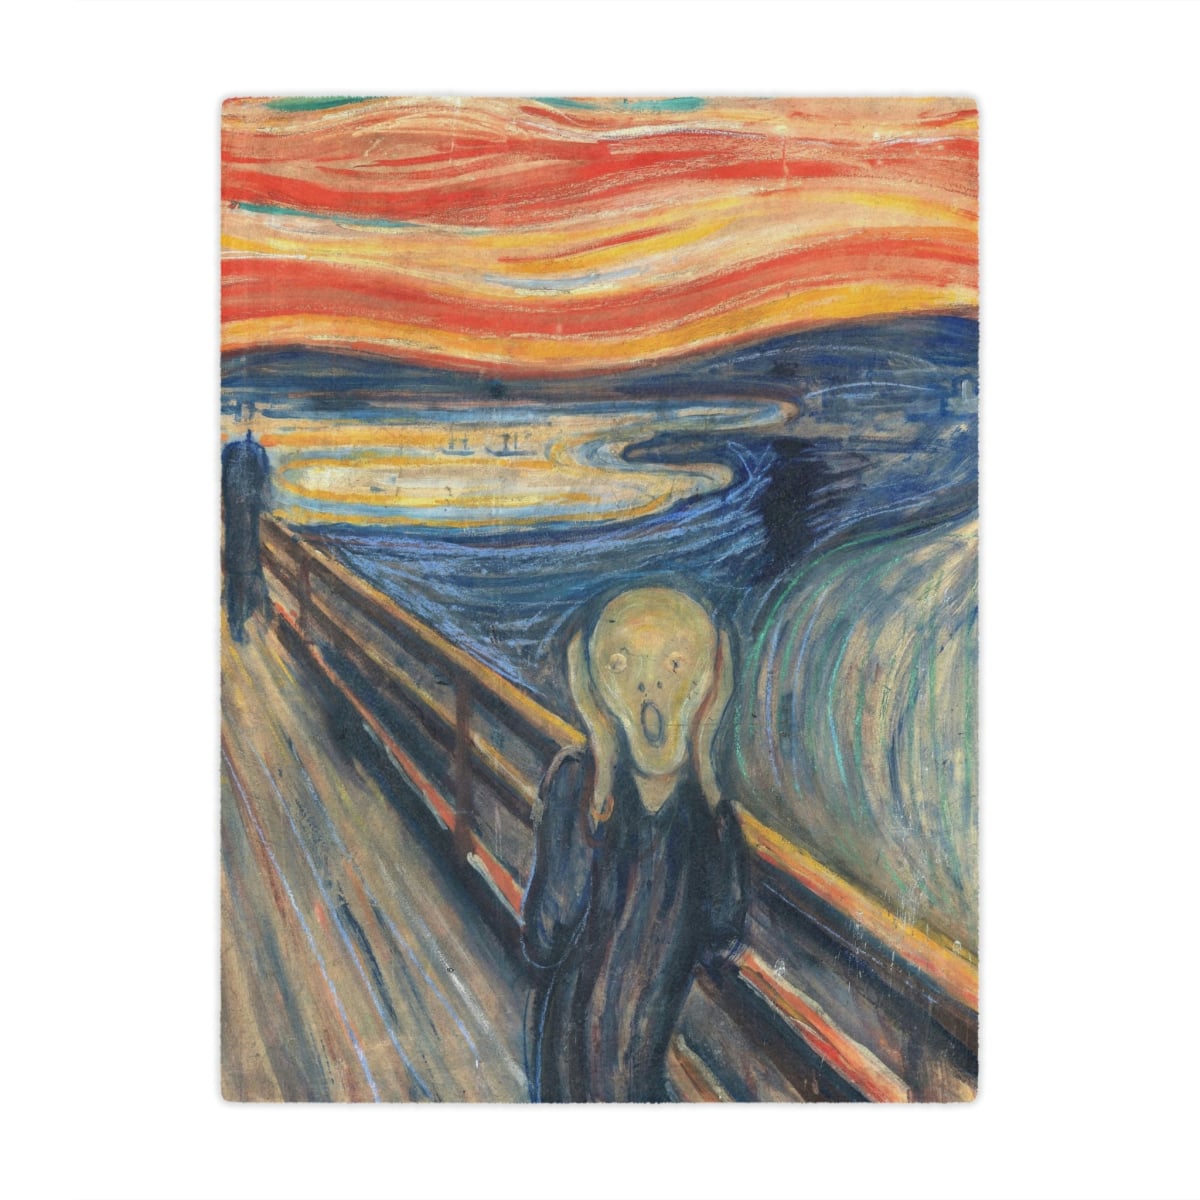 The Scream by Edvard Munch Painting Blanket - Iconic Art Reproduction